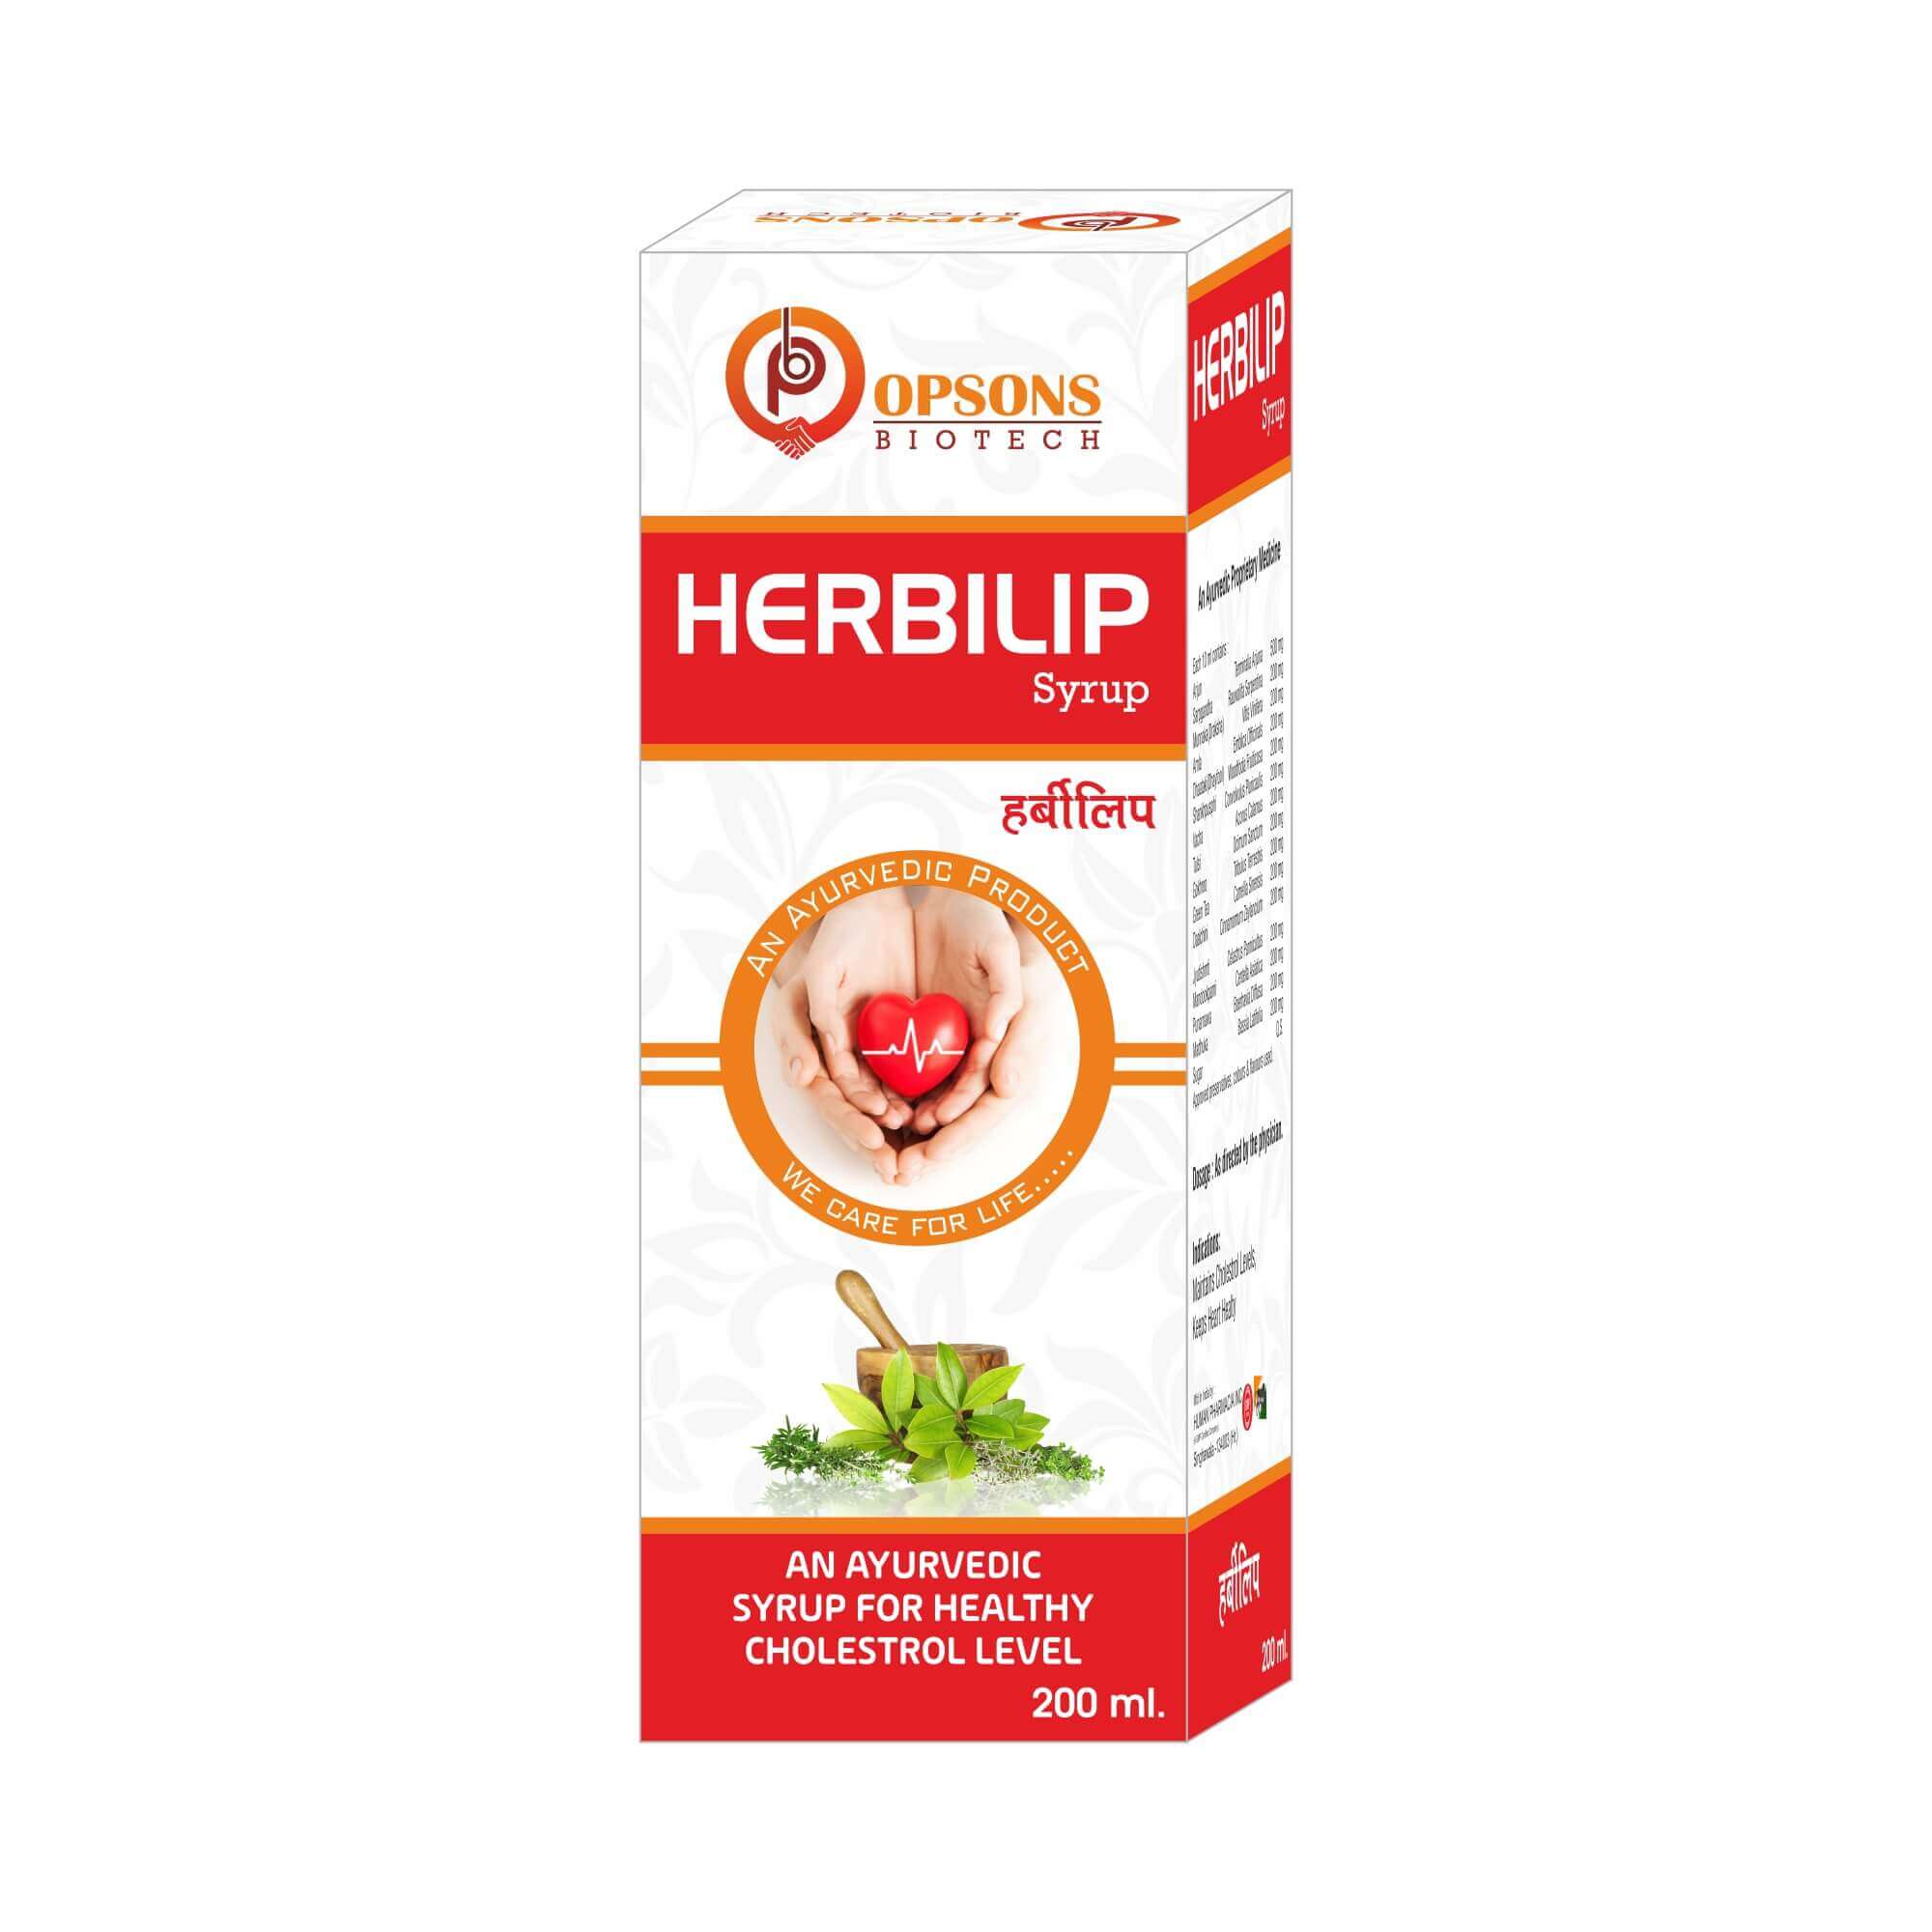 Product Name: Herbilip, Compositions of An Ayurvedic Syrup For Healthy Cholestrol Level are An Ayurvedic Syrup For Healthy Cholestrol Level - Opsons Biotech